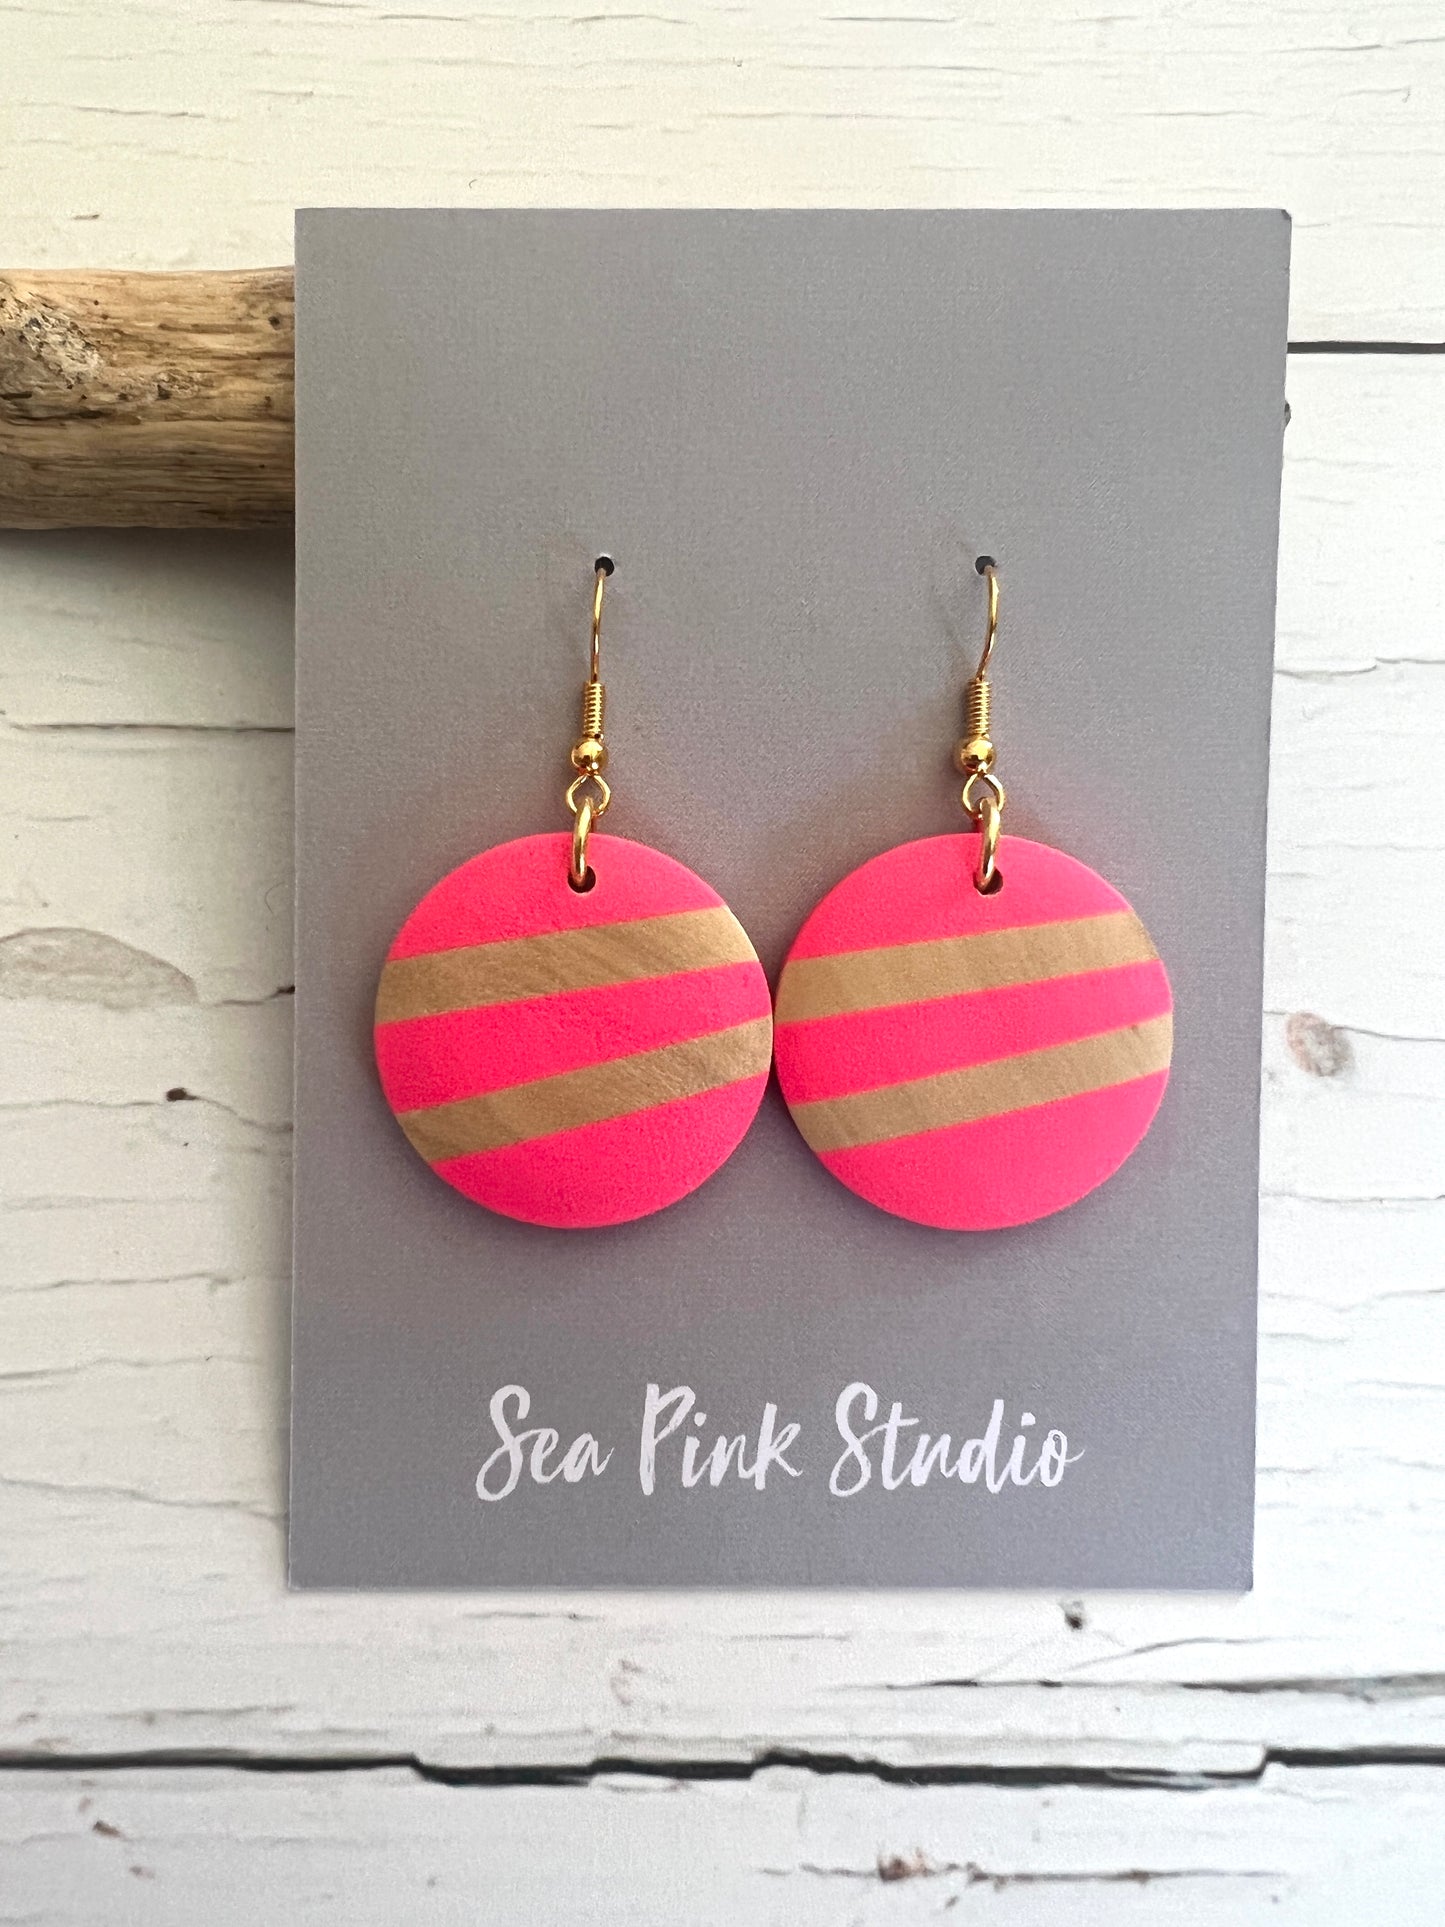 Hand-painted Wooden Bead Statement Earrings